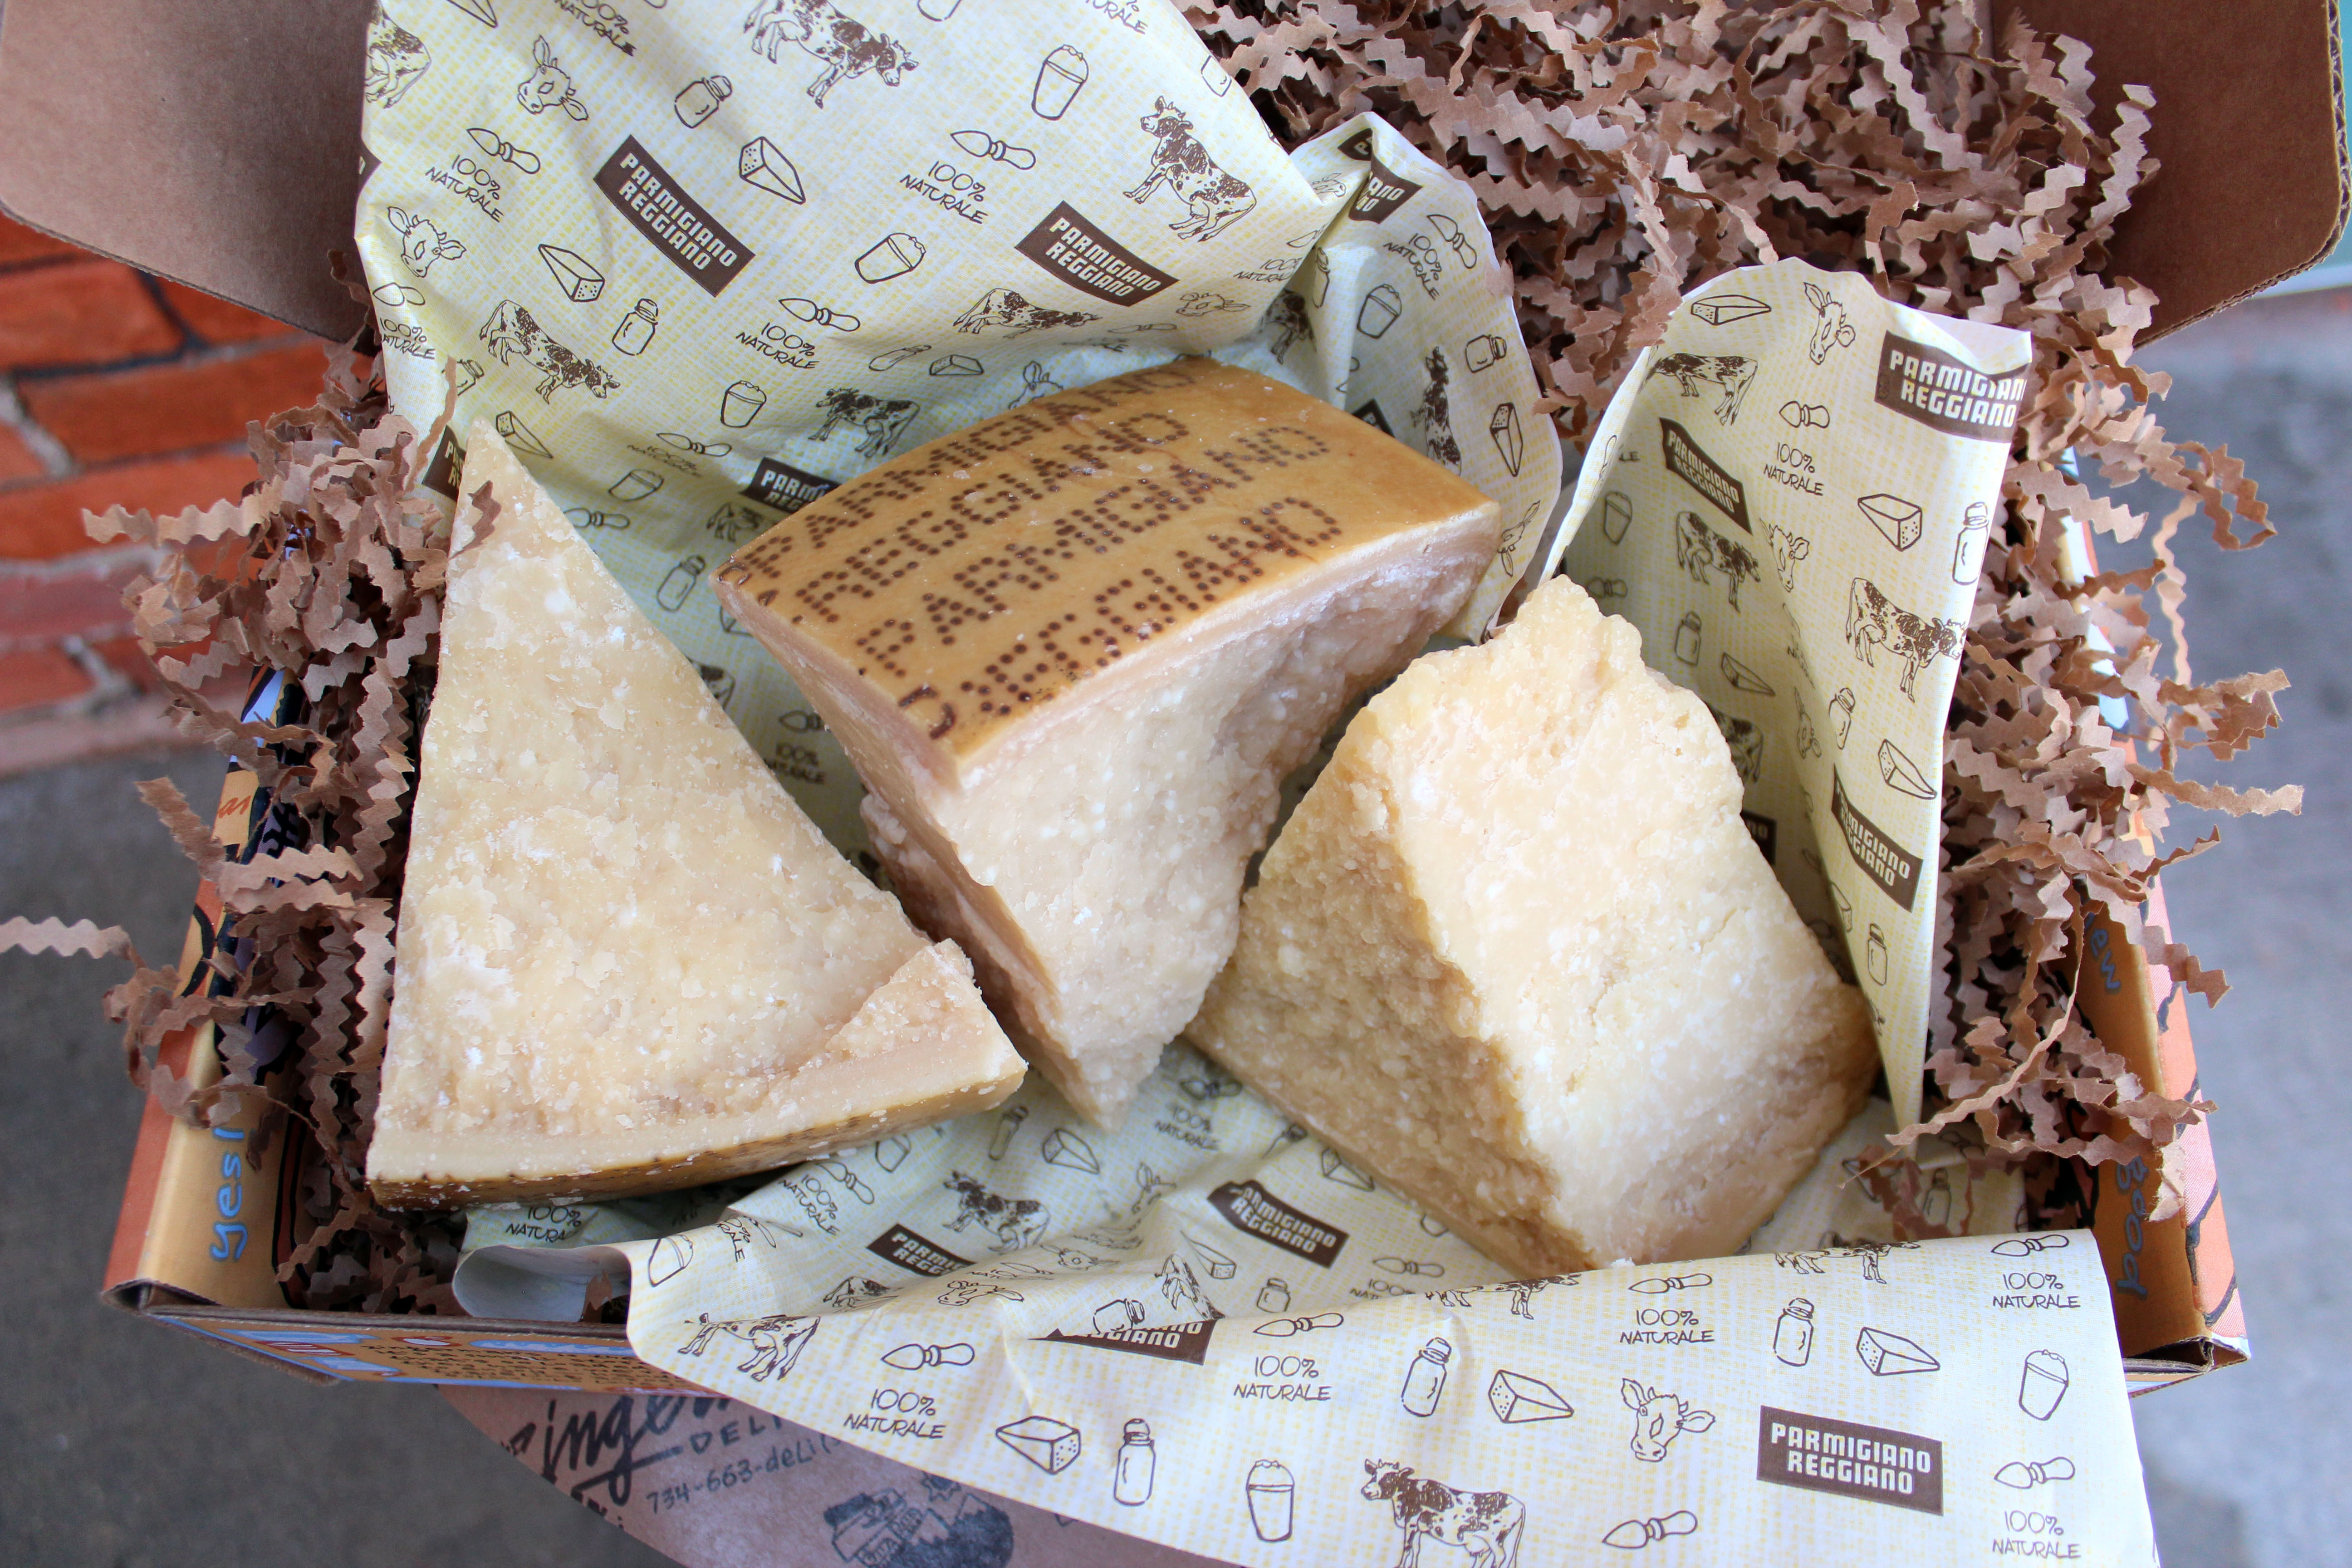 A sample box of 3 different kinds of Parmagiano Reggiano